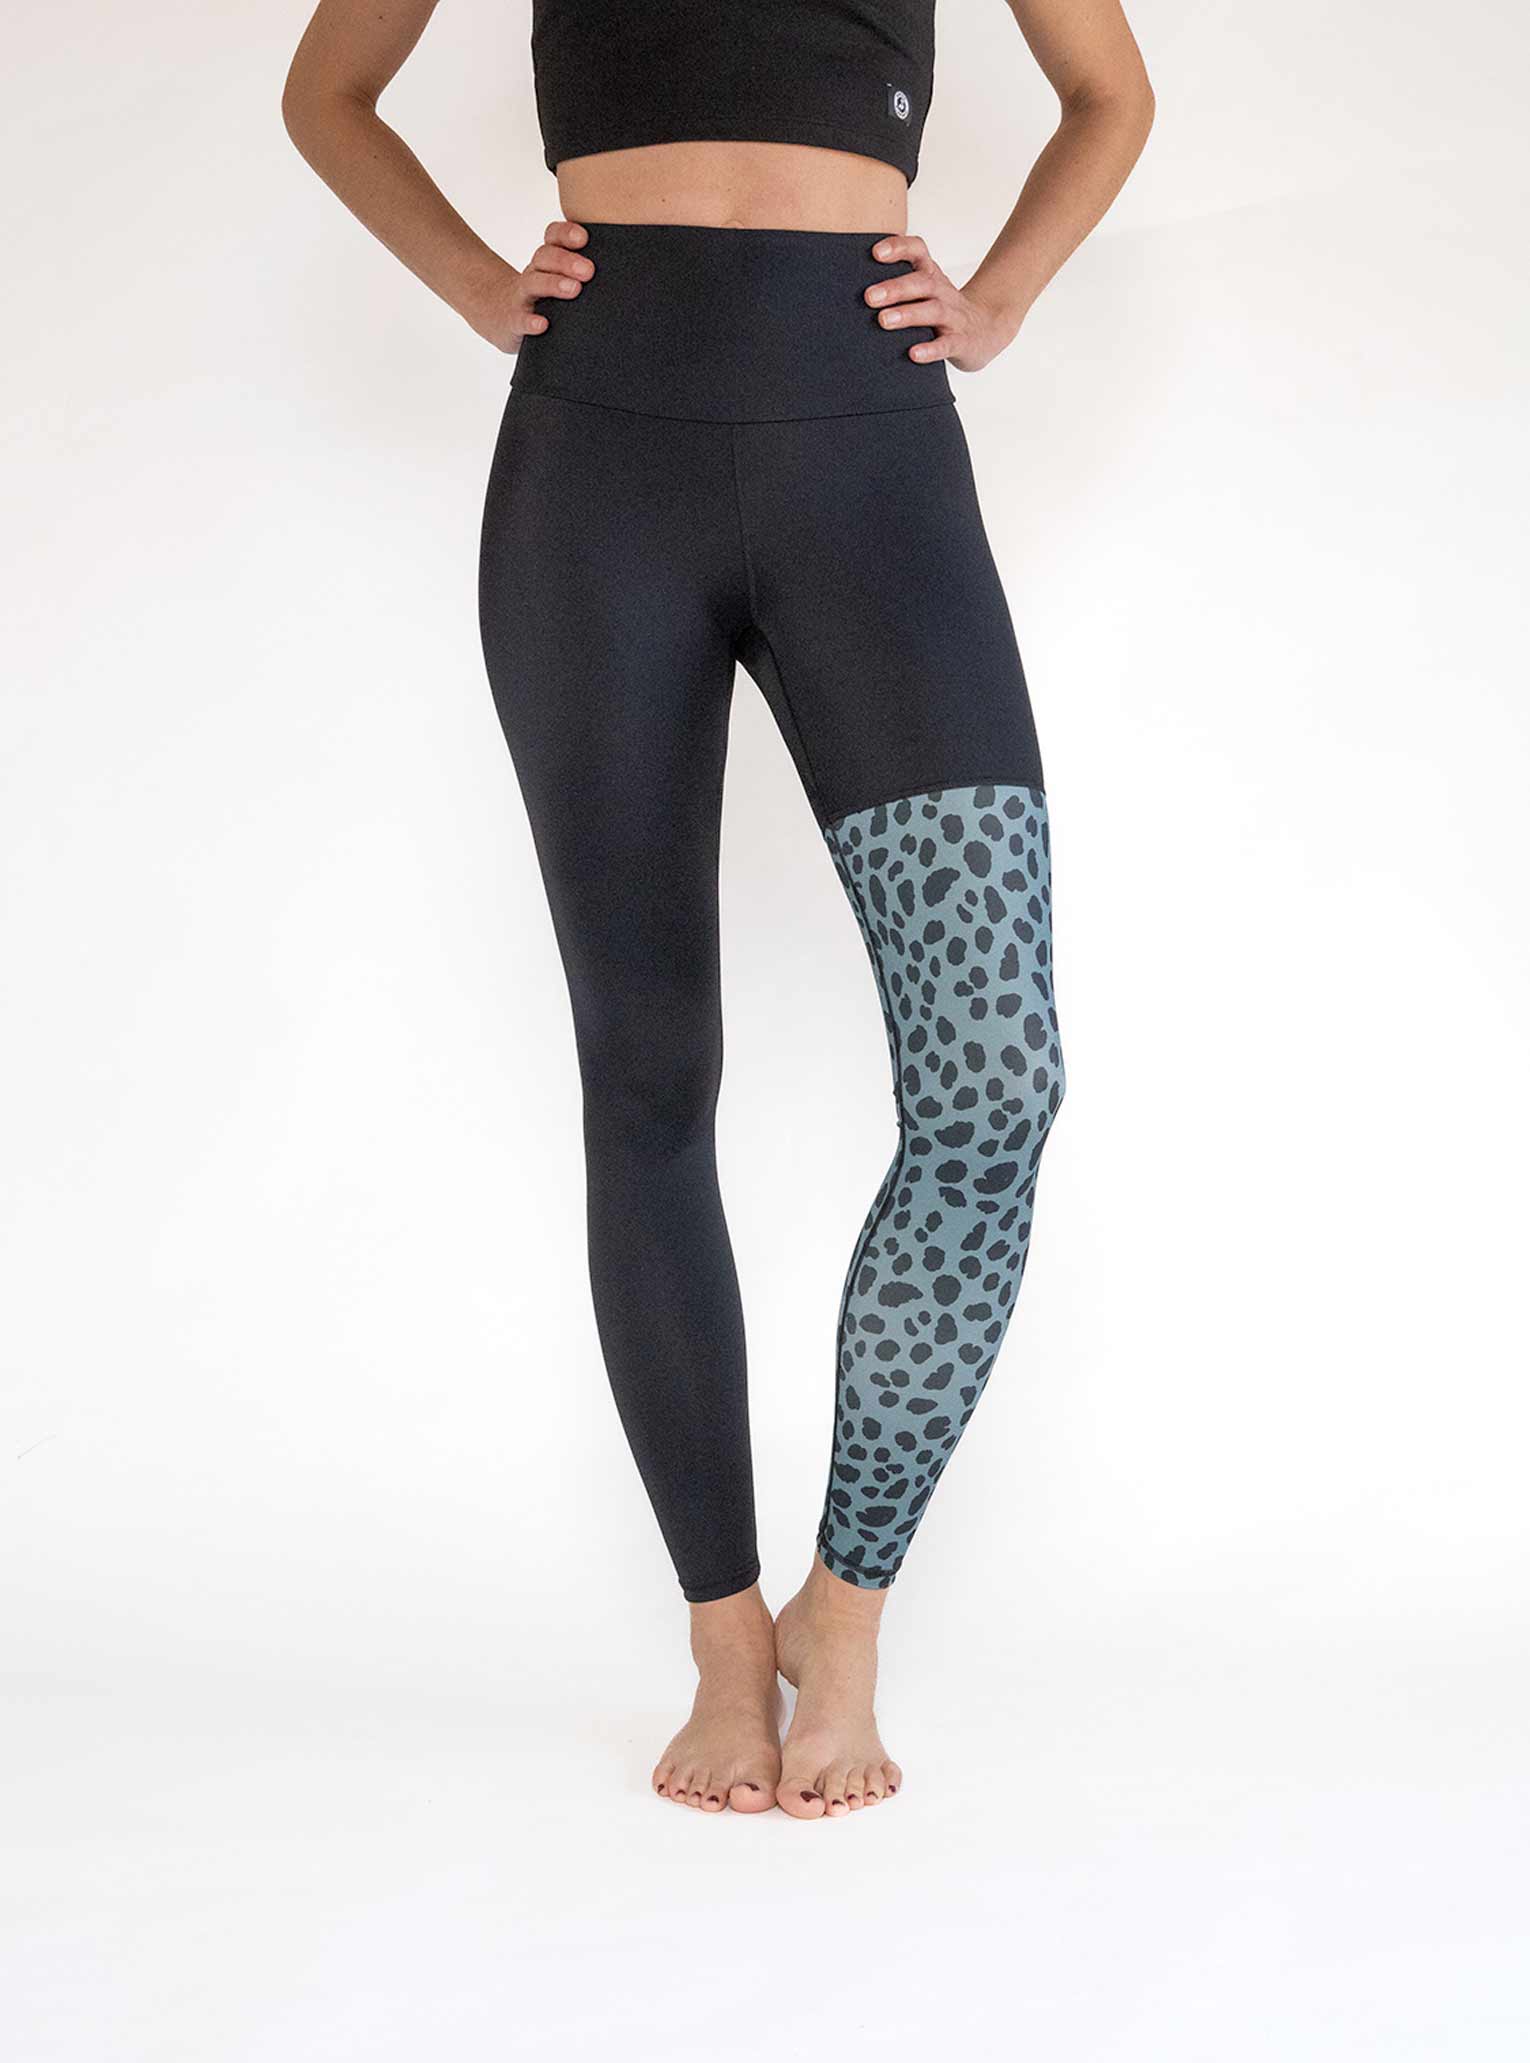 Arctic Flamingo Leggings Only For The Bold Yogis Our, 46% OFF